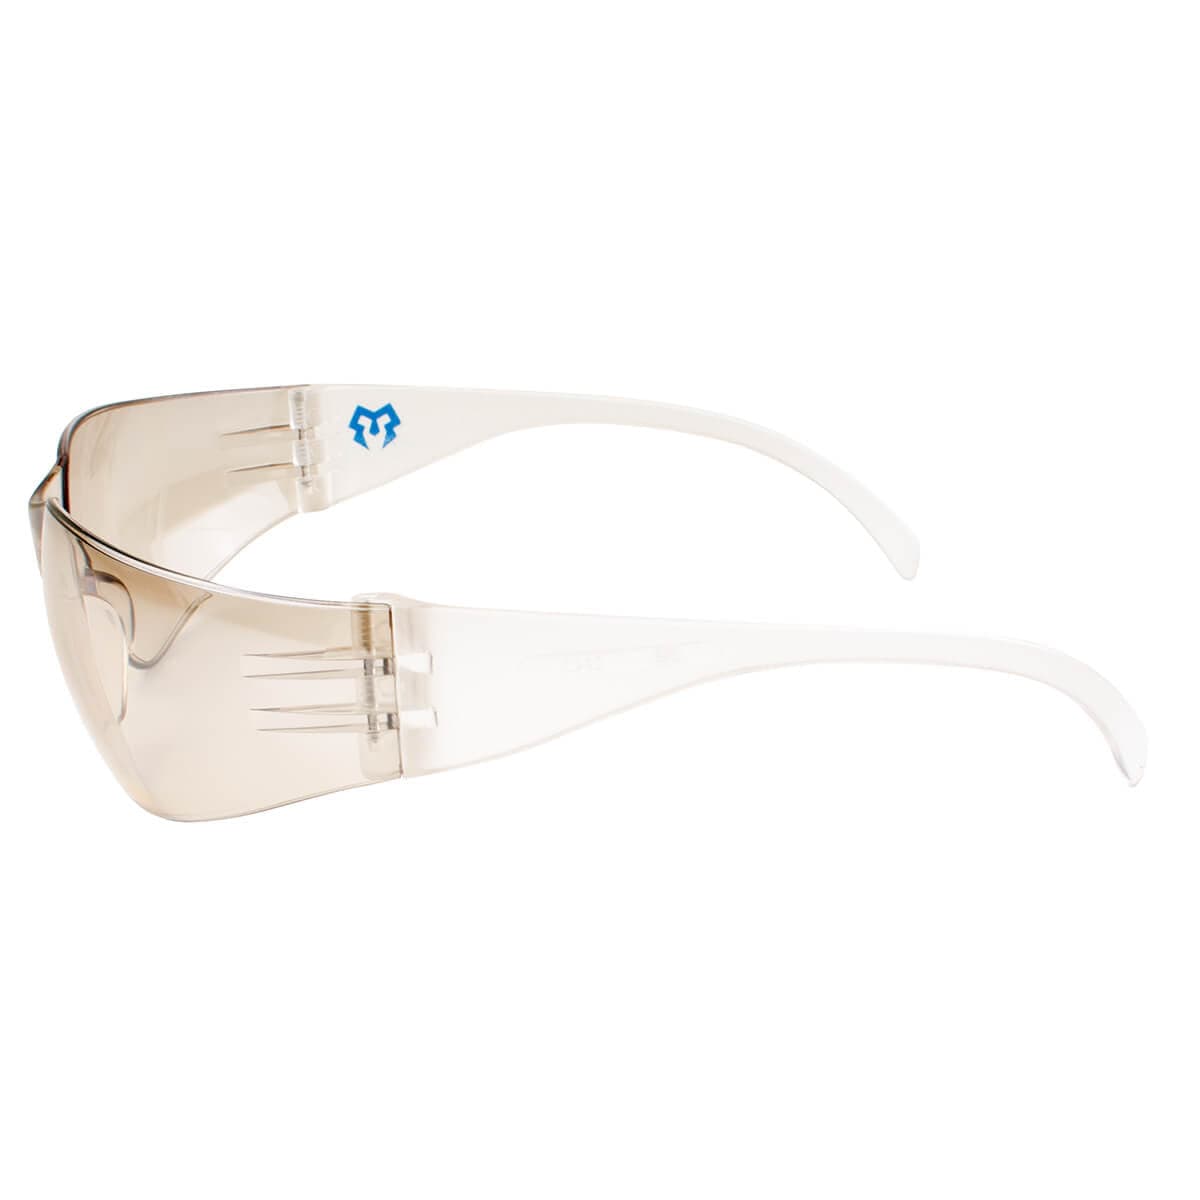 METEL M10 Safety Glasses with Indoor/Outdoor Mirror Lenses Side View